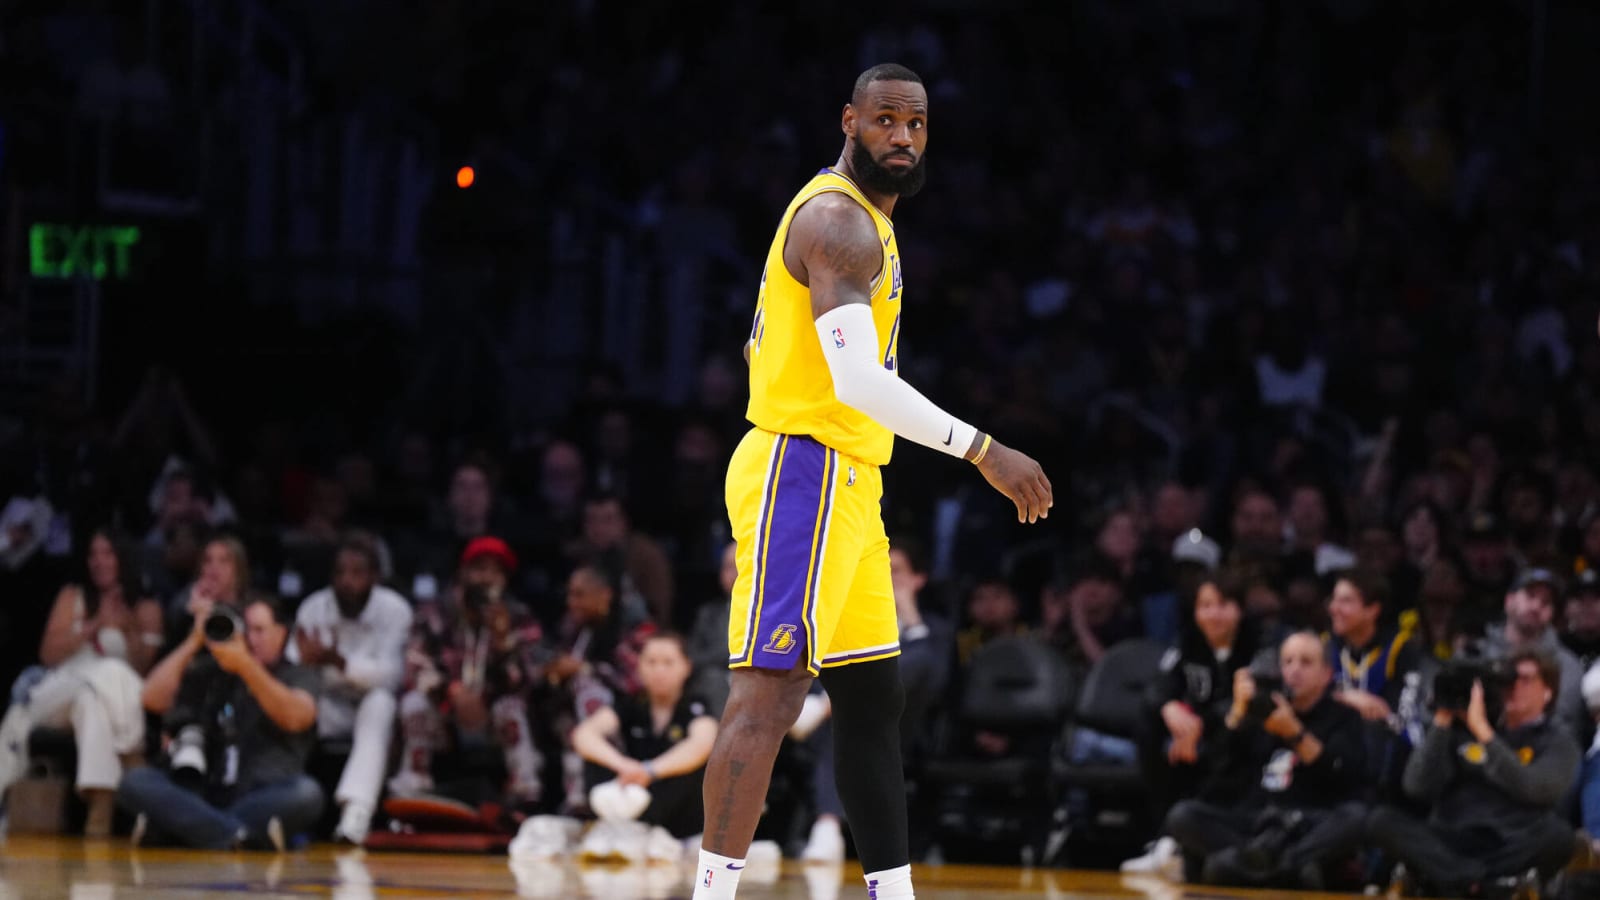 Watch: ‘Baffled’ LeBron James furious after Chris Paul wasn’t called for a foul despite intentionally trying to take the Lakers star down